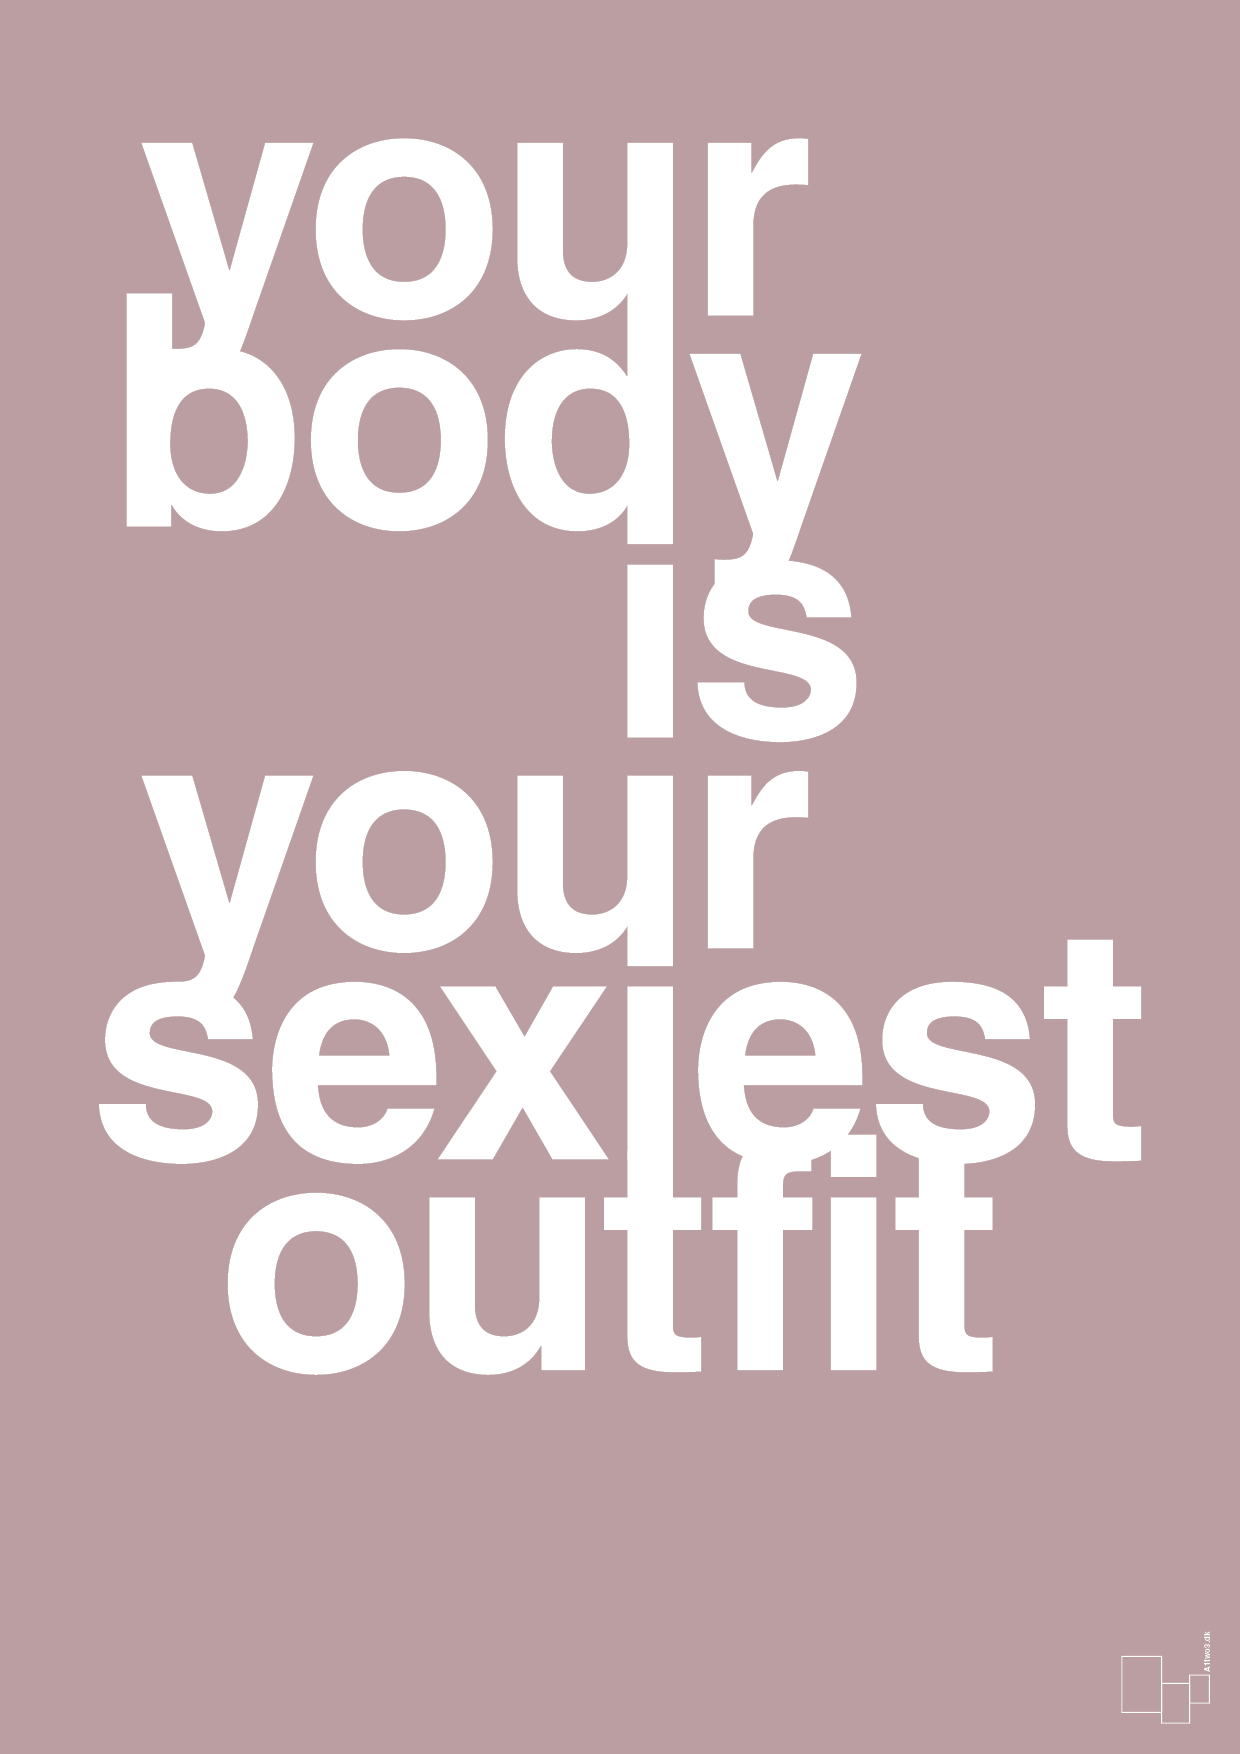 your body is your sexiest outfit - Plakat med Sport & Fritid i Light Rose